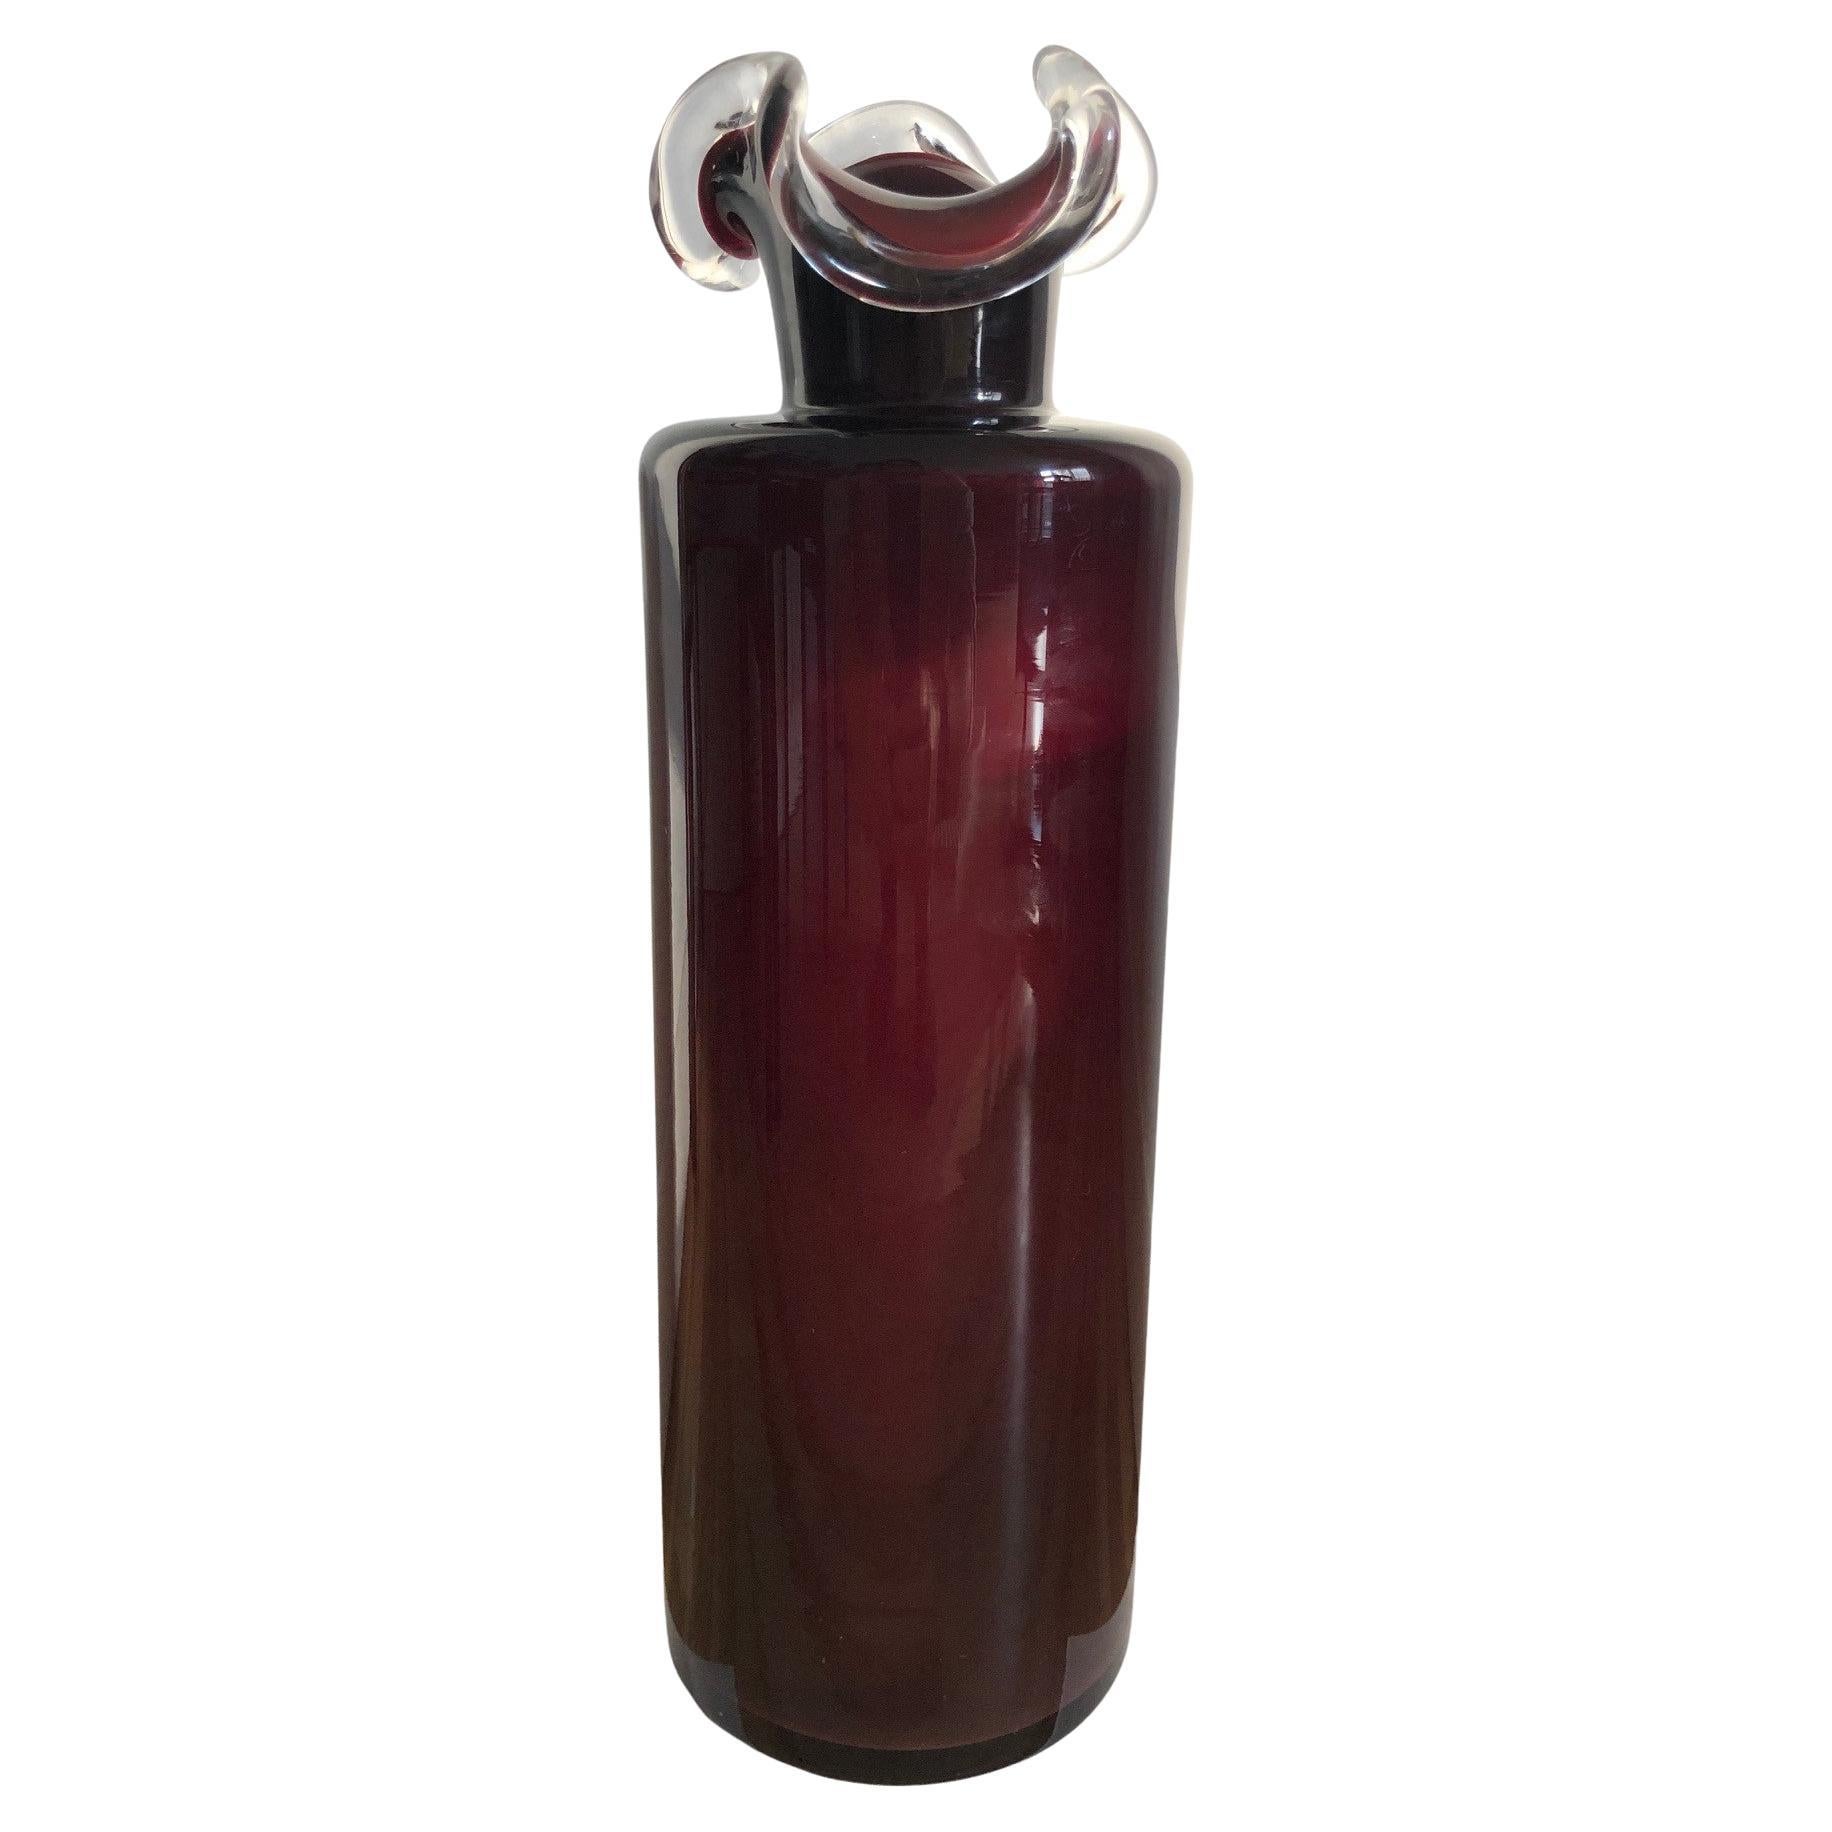 Large Burgundy Vase with a Frill, Tarnowiec Glassworks, Poland, 1970s For Sale